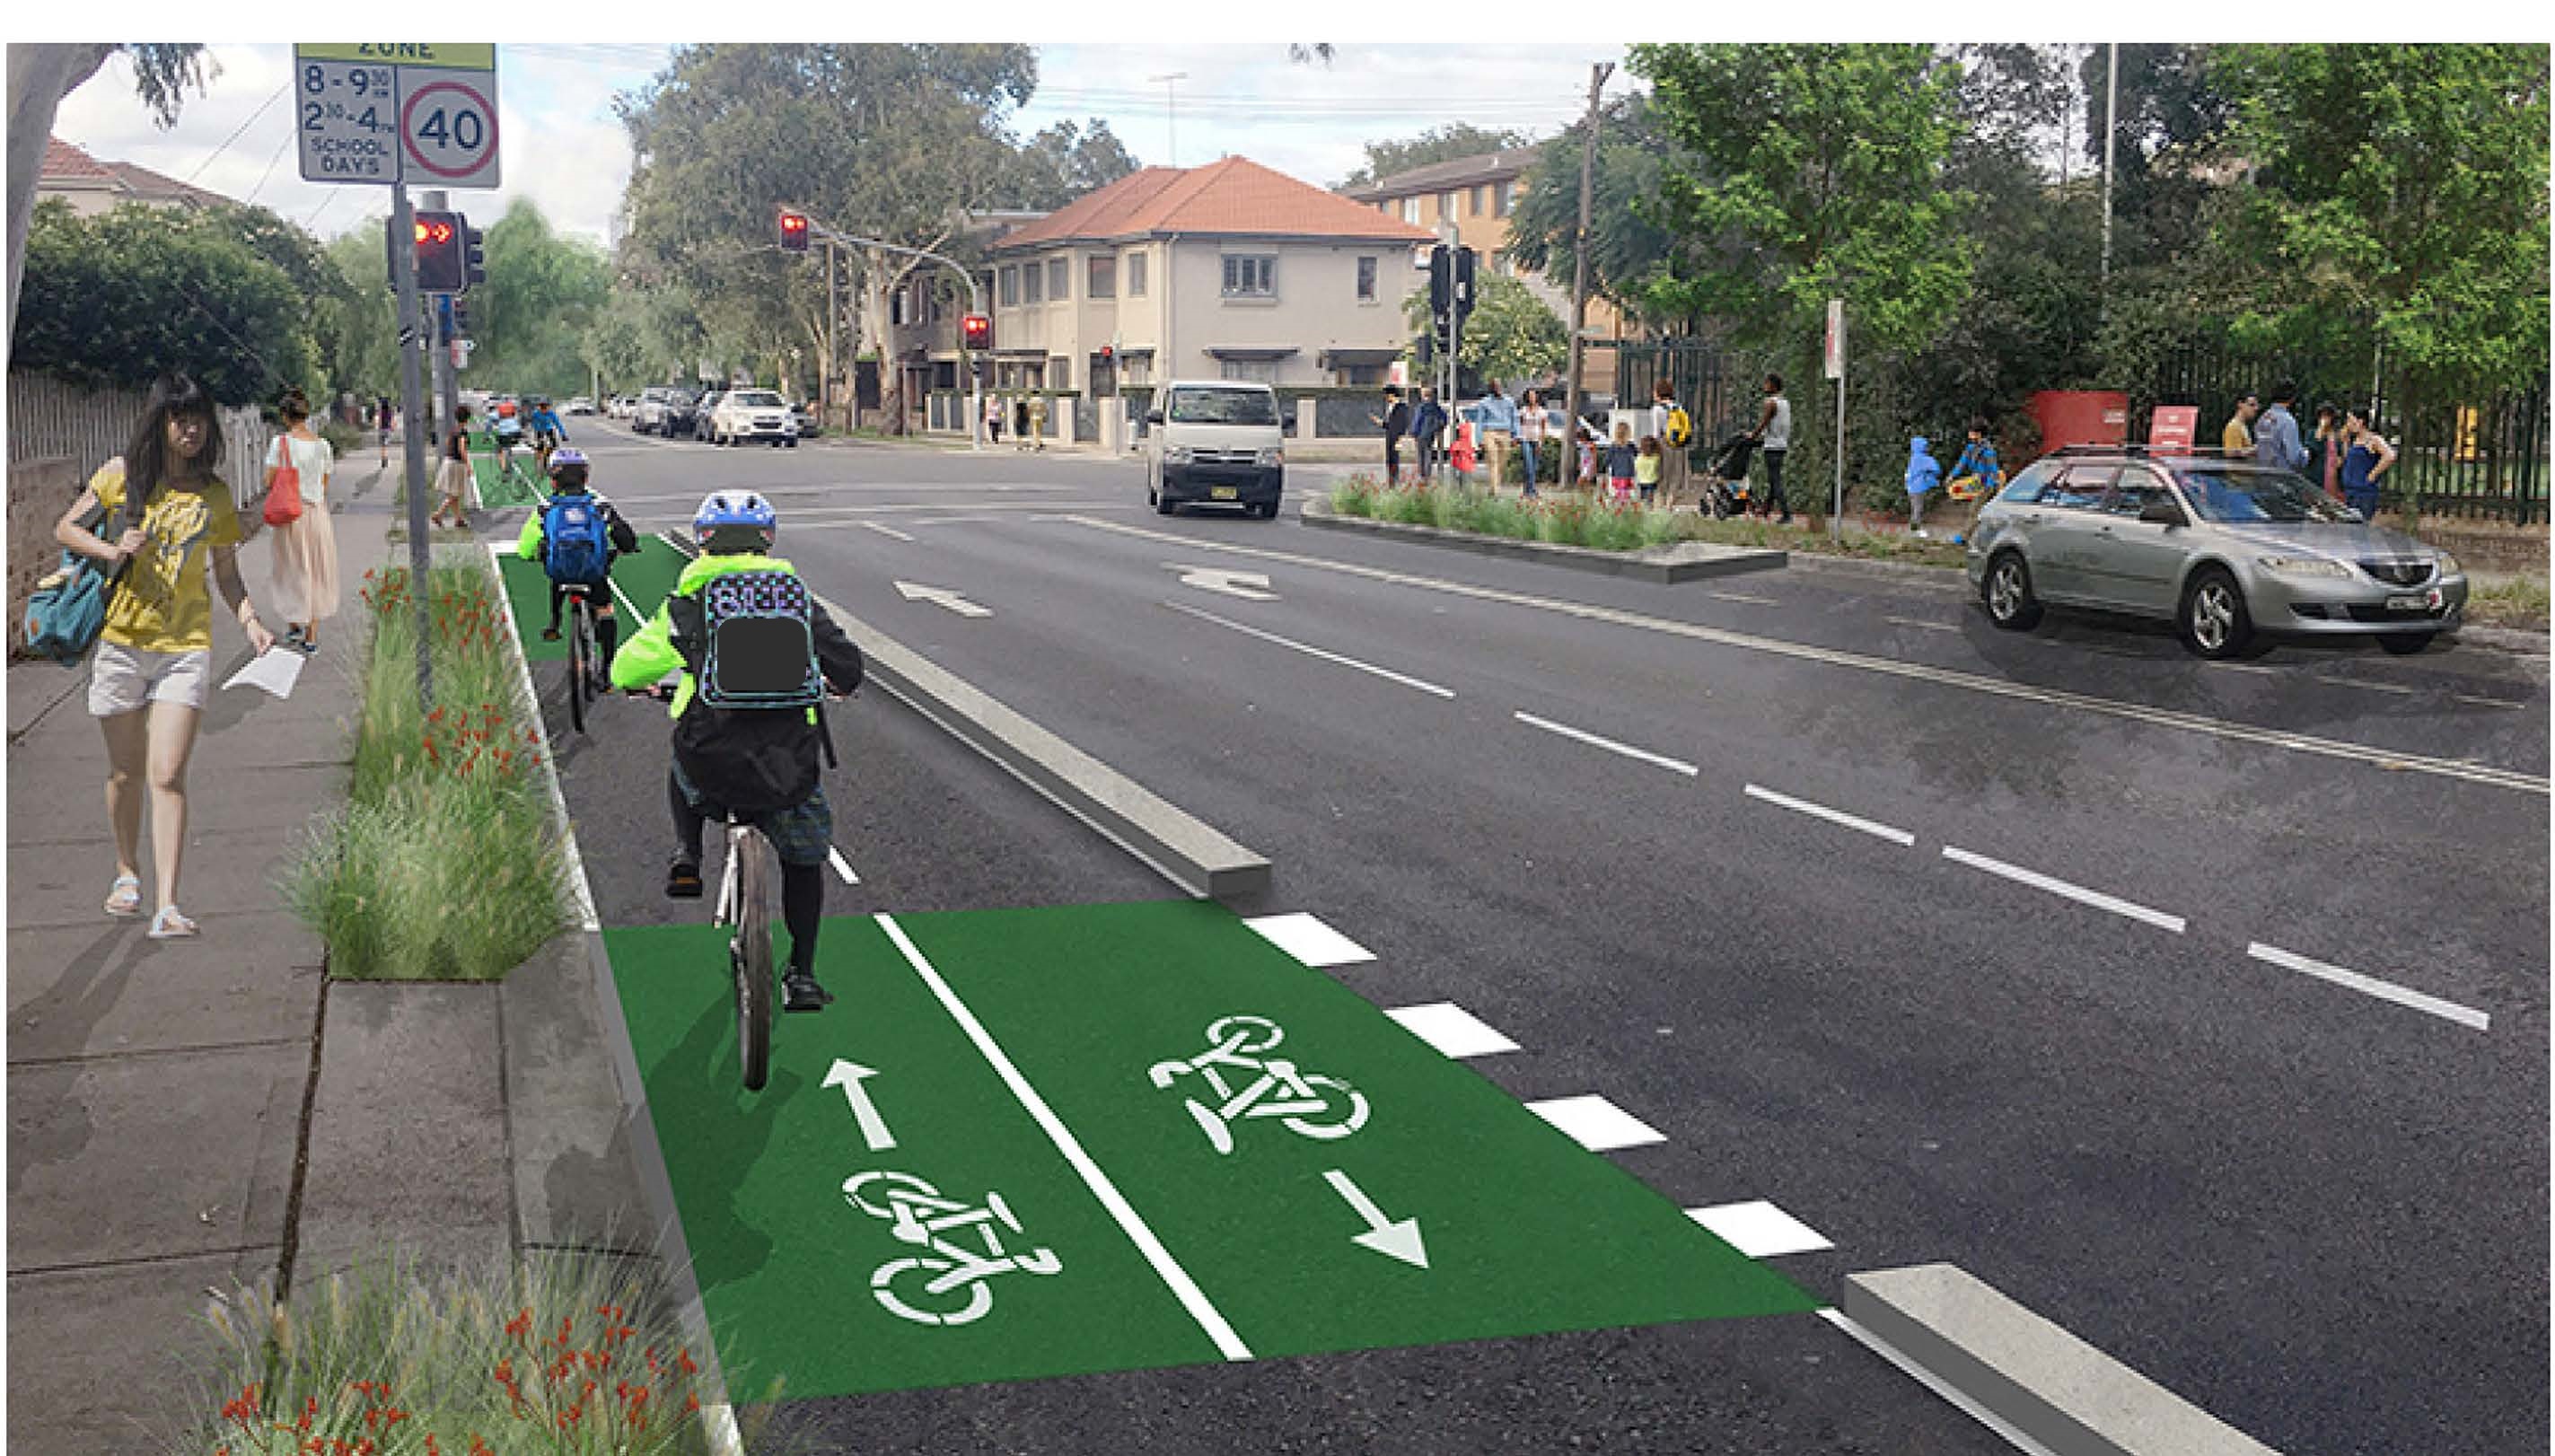 Artist impression - Improvements at the Doncaster Avenue and Todman Avenue intersection